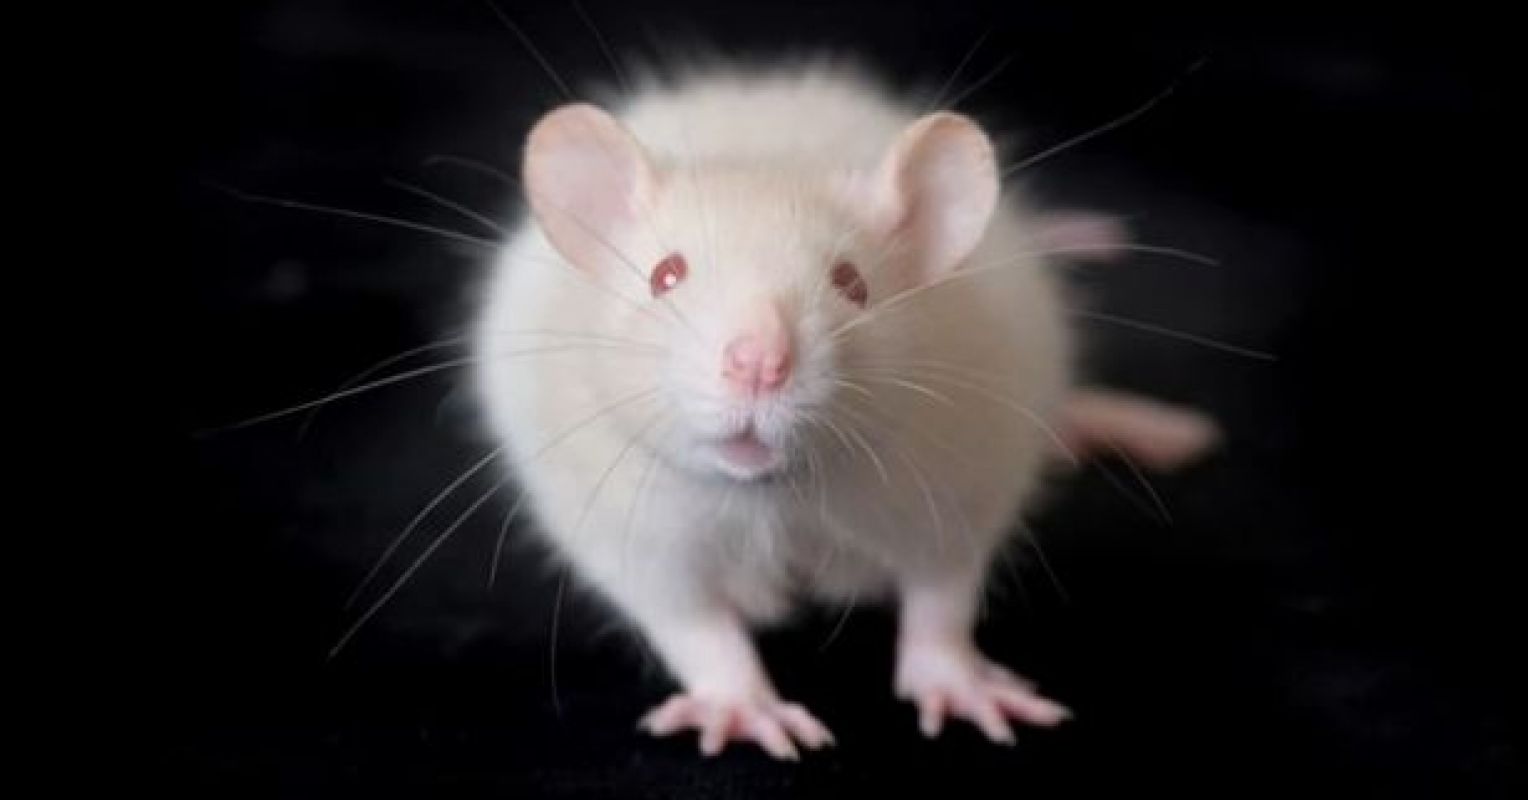 The Emotional Lives of Rats: Rats Read Pain in Others' Faces | Psychology Today